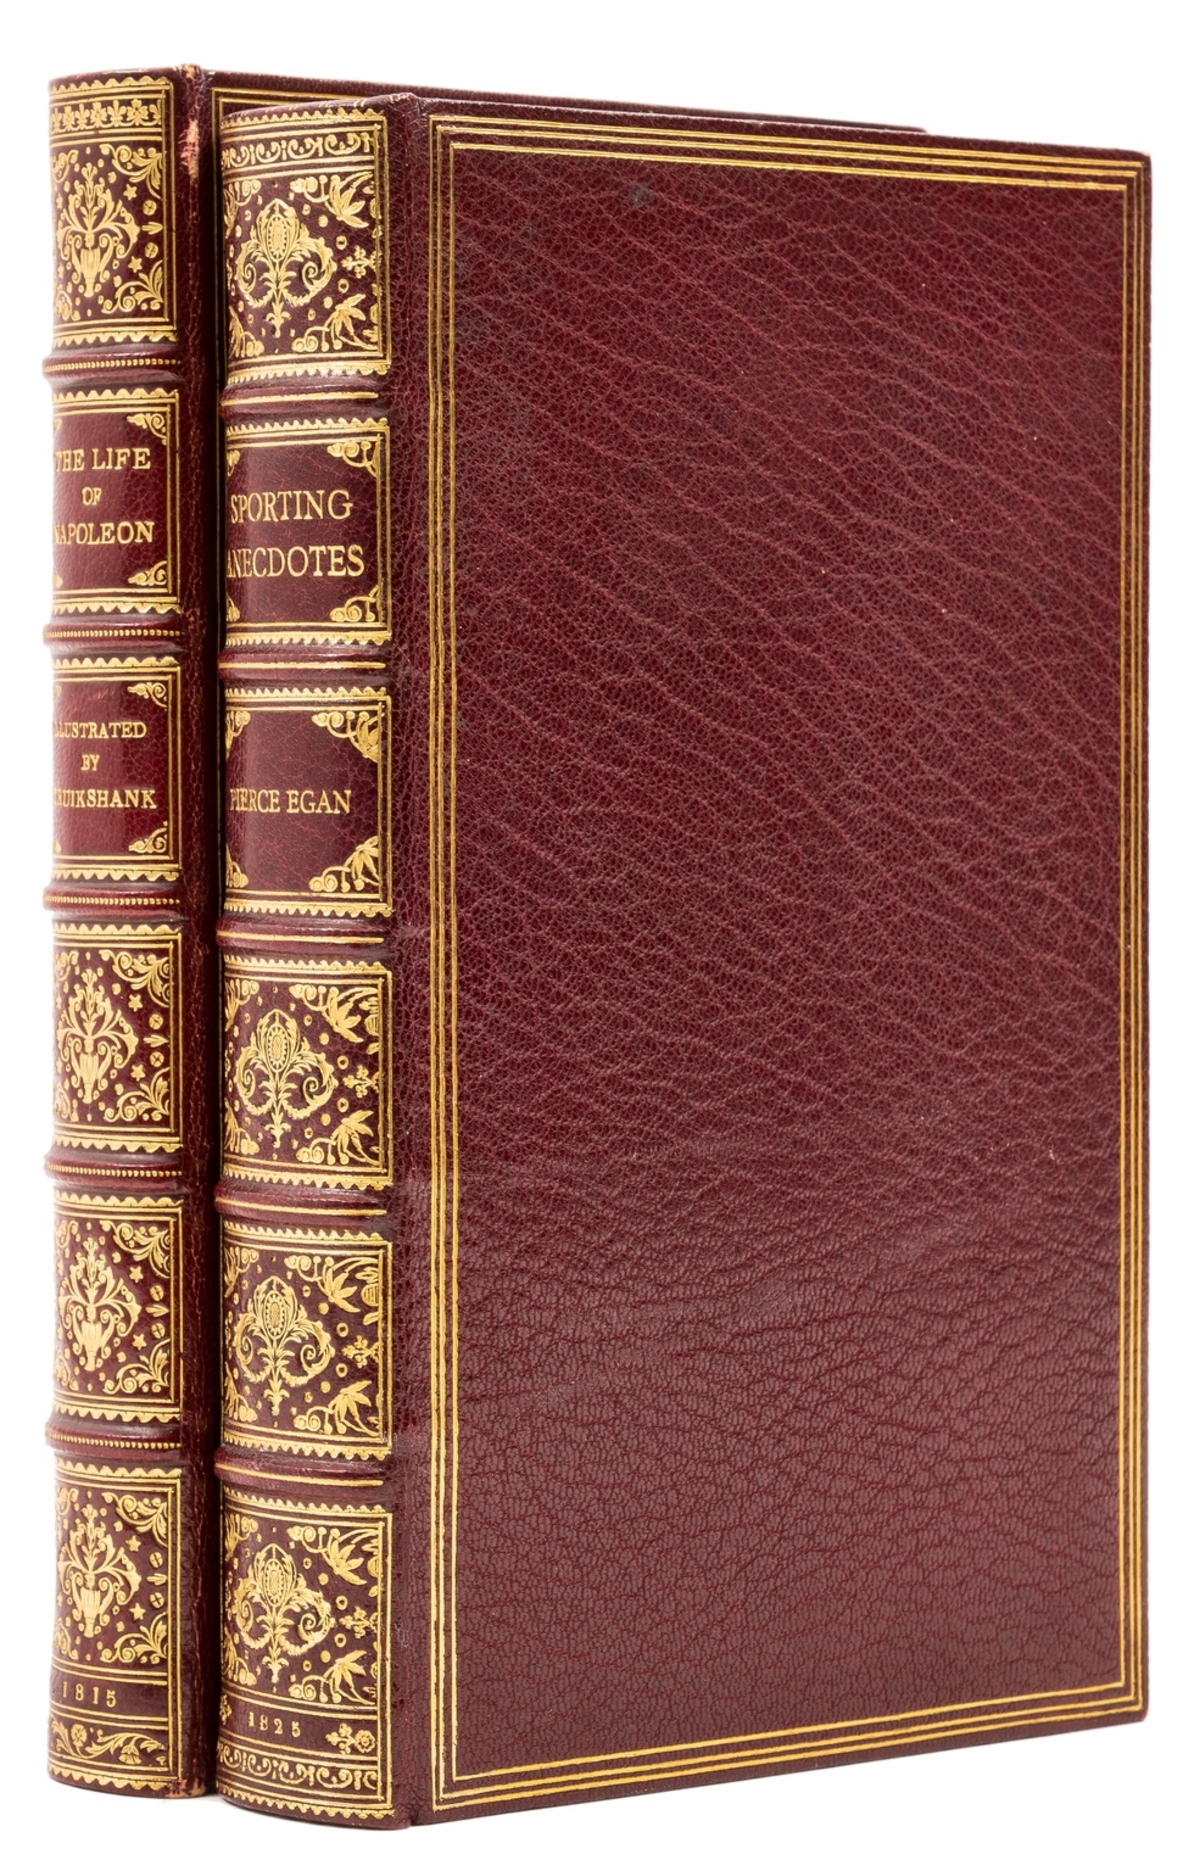 [Combe (William)] The Life of Napoleon, a Hudibrastic Poem in Fifteen Cantos, first edition, …